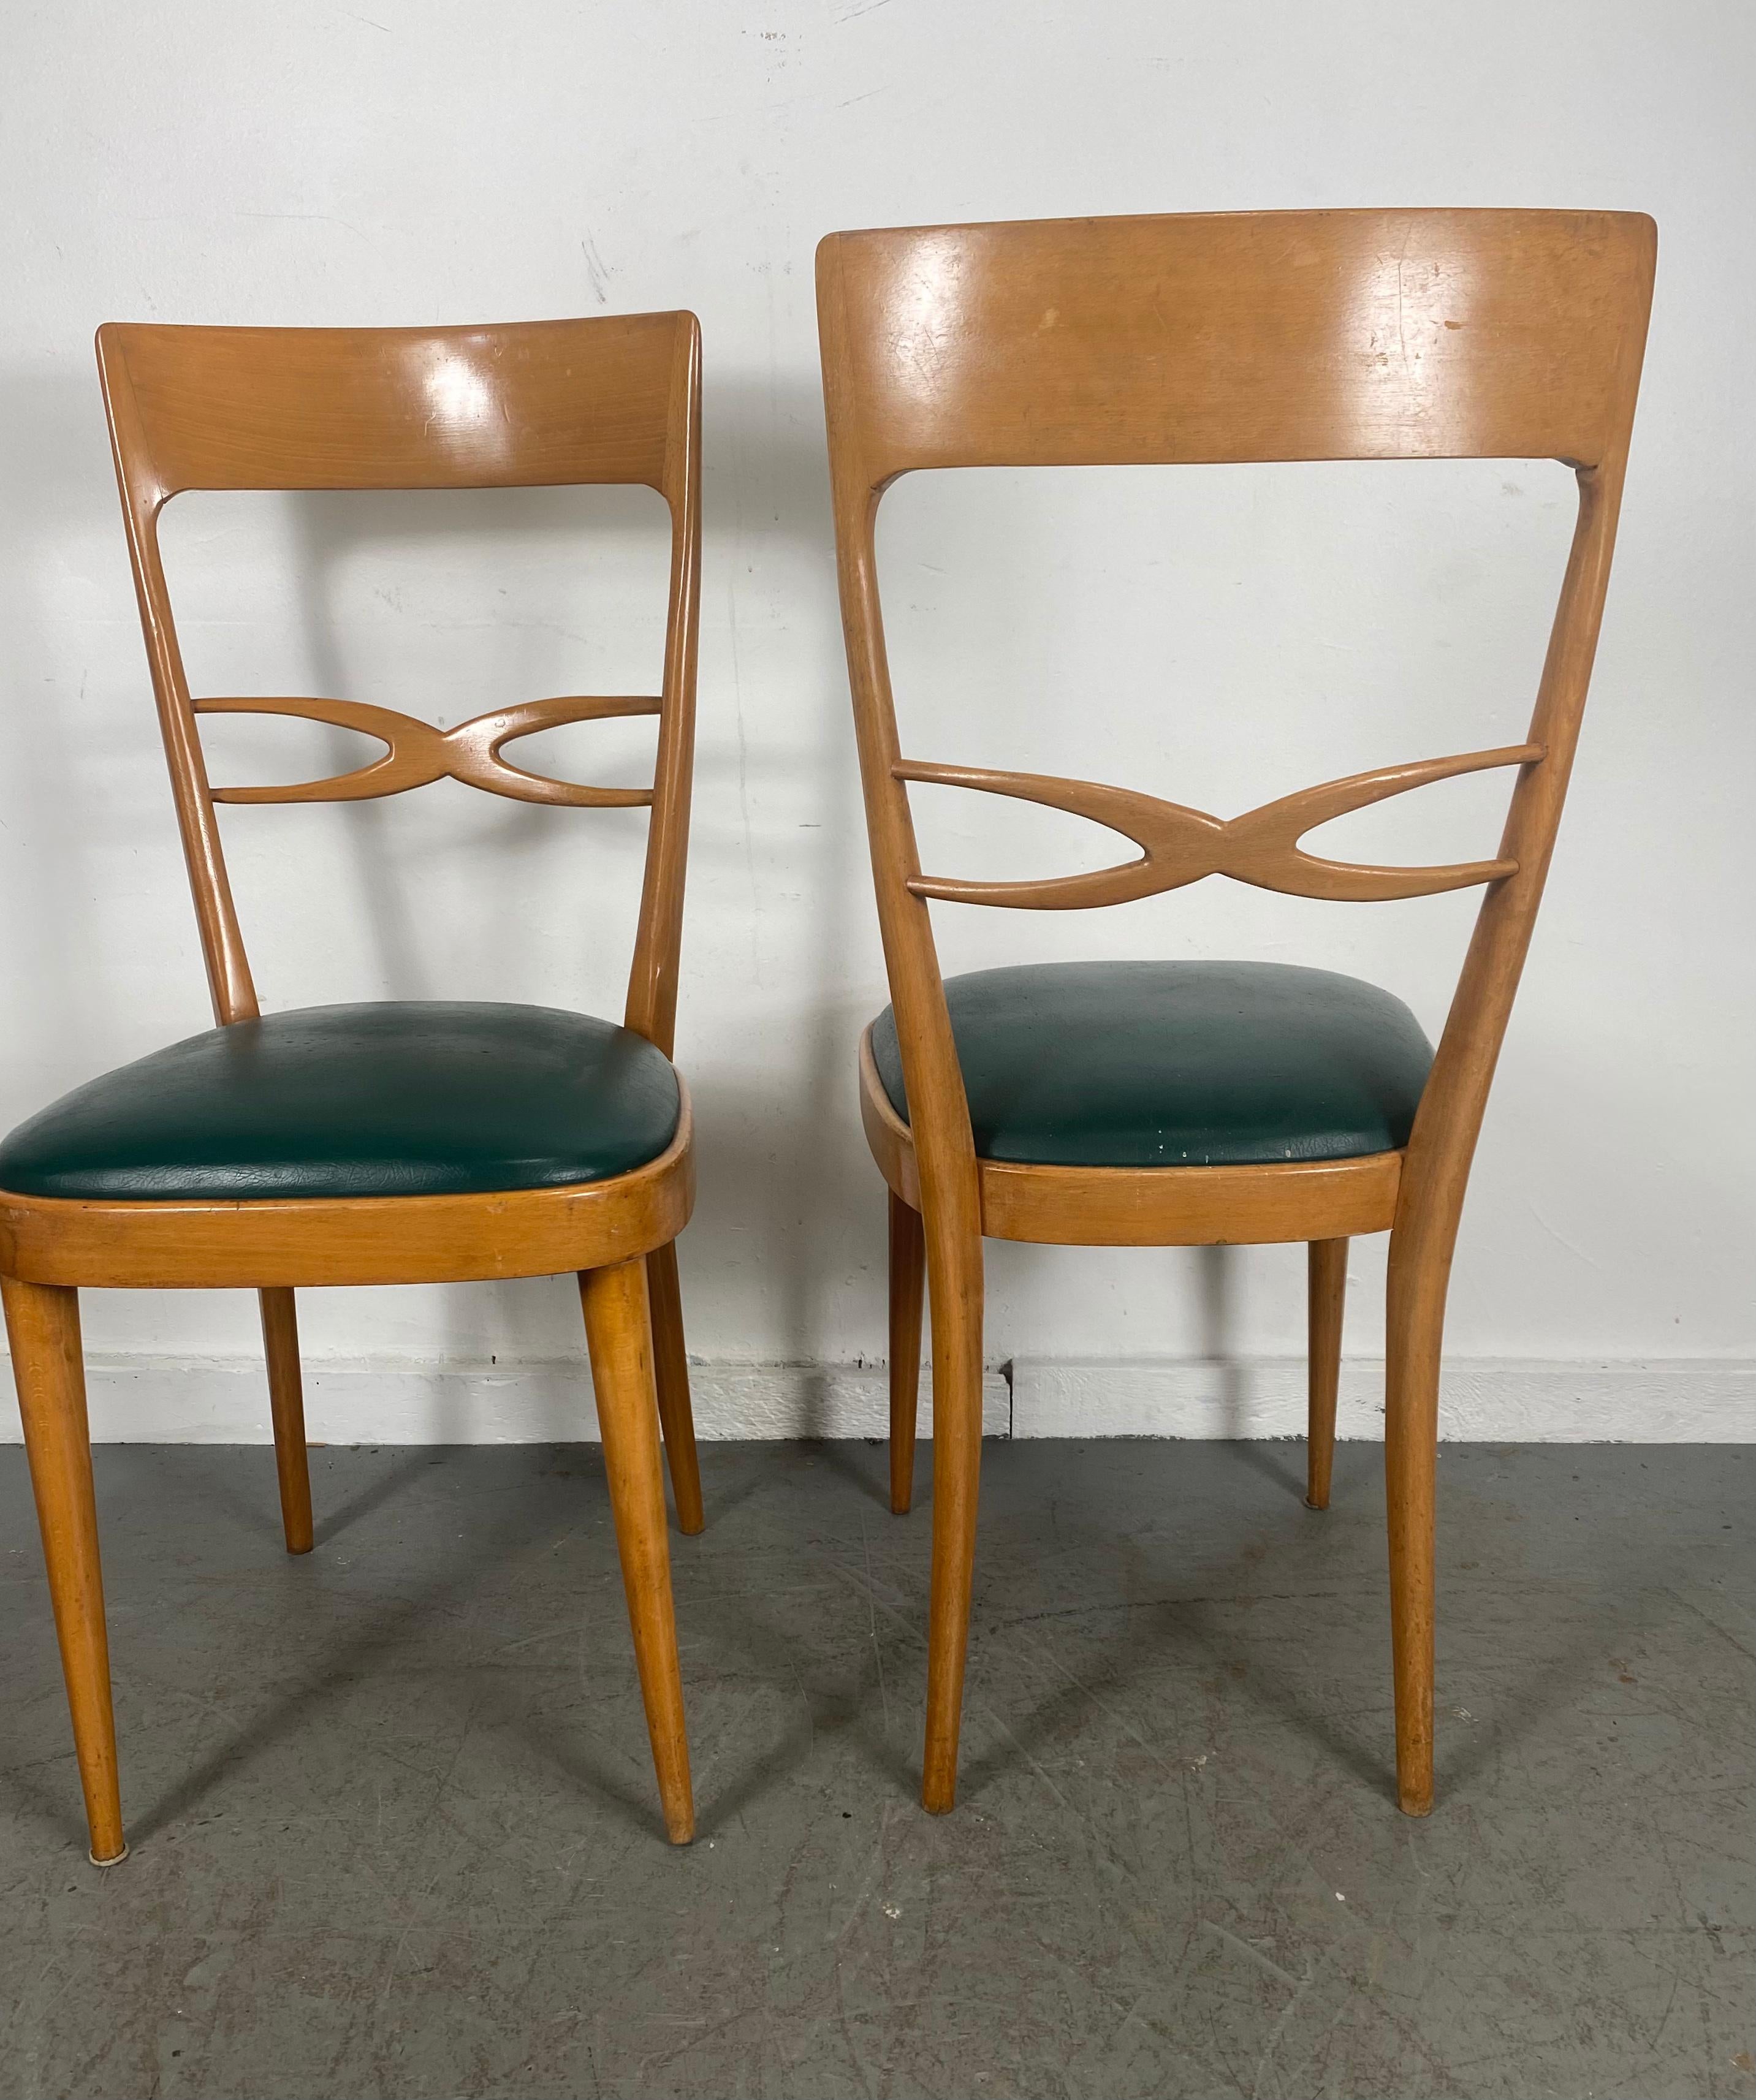 Set 6 Mid Century Modernist Italian Dining Chairs, Early 1950s, Beech Wood 2